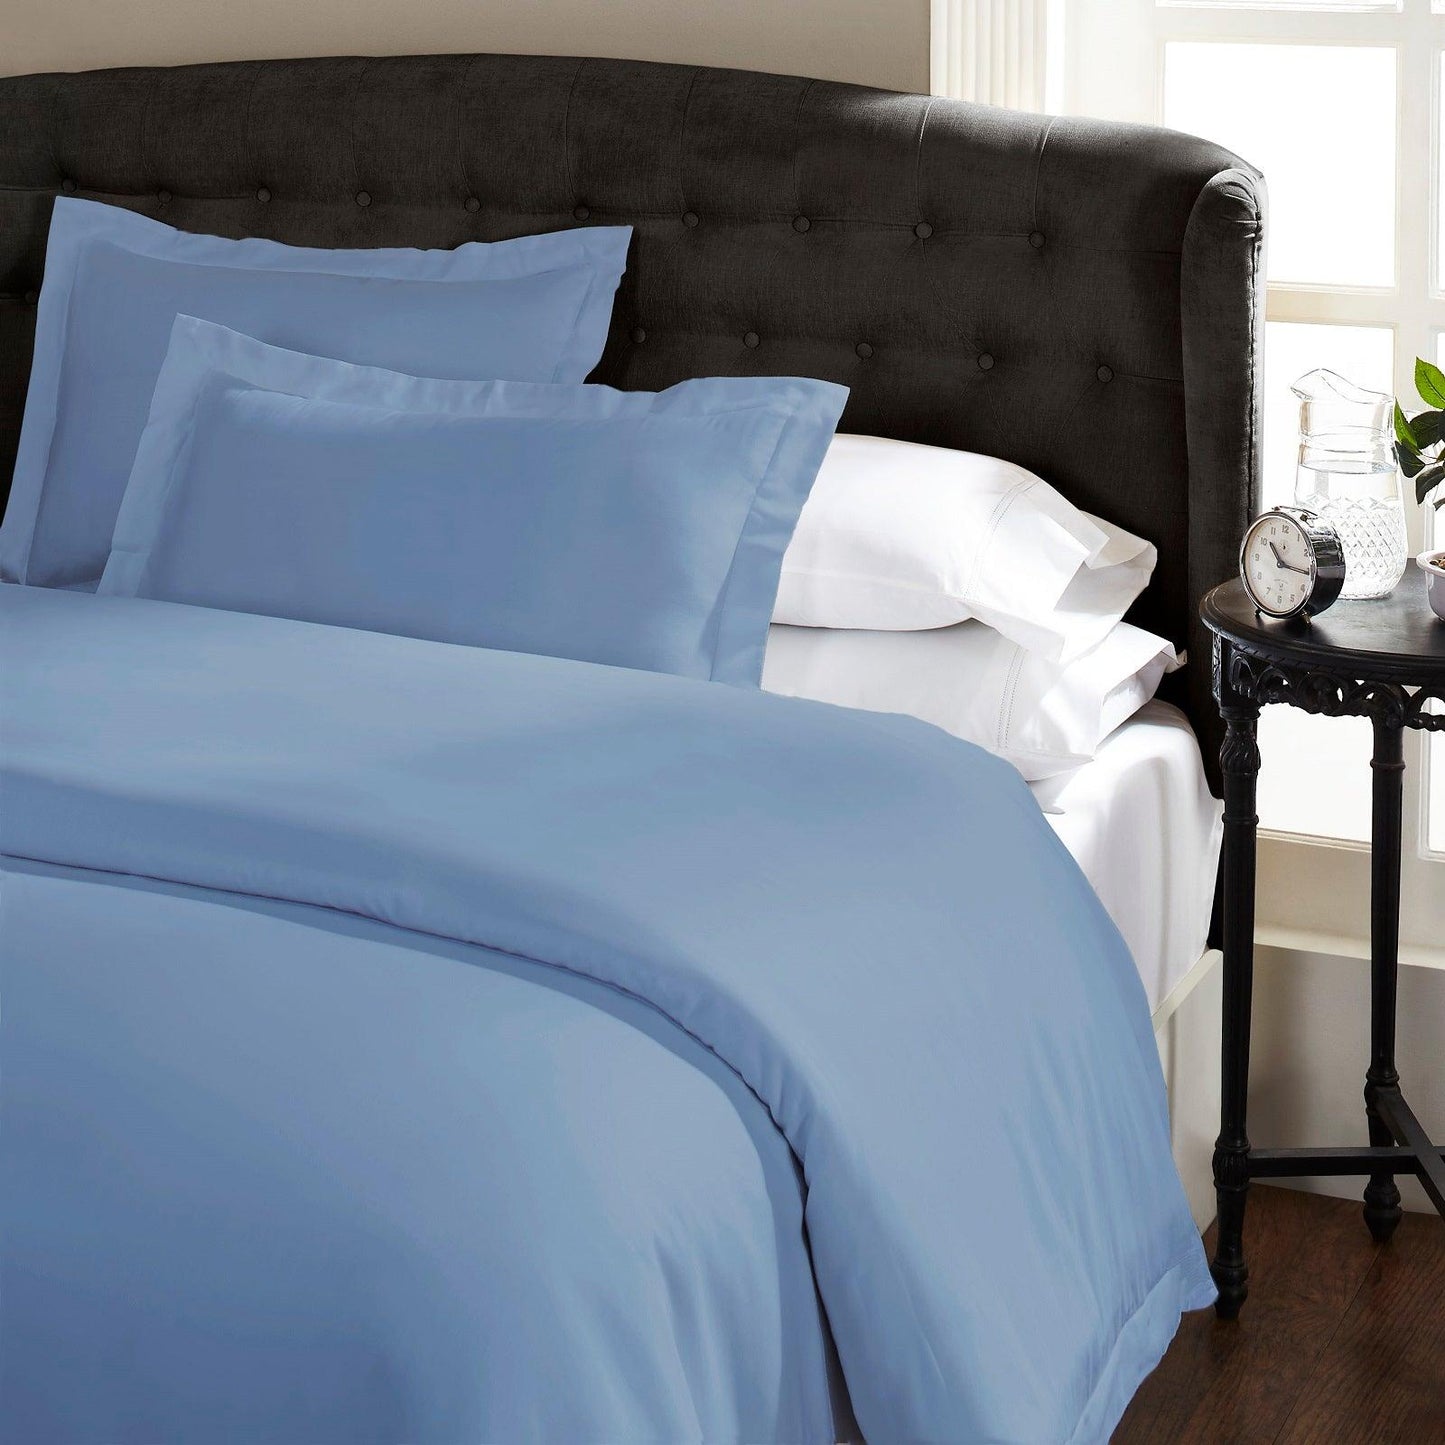 Ddecor Home 1000 Thread Count Quilt Cover Set Cotton Blend Classic Hotel Style - King - Blue Fog